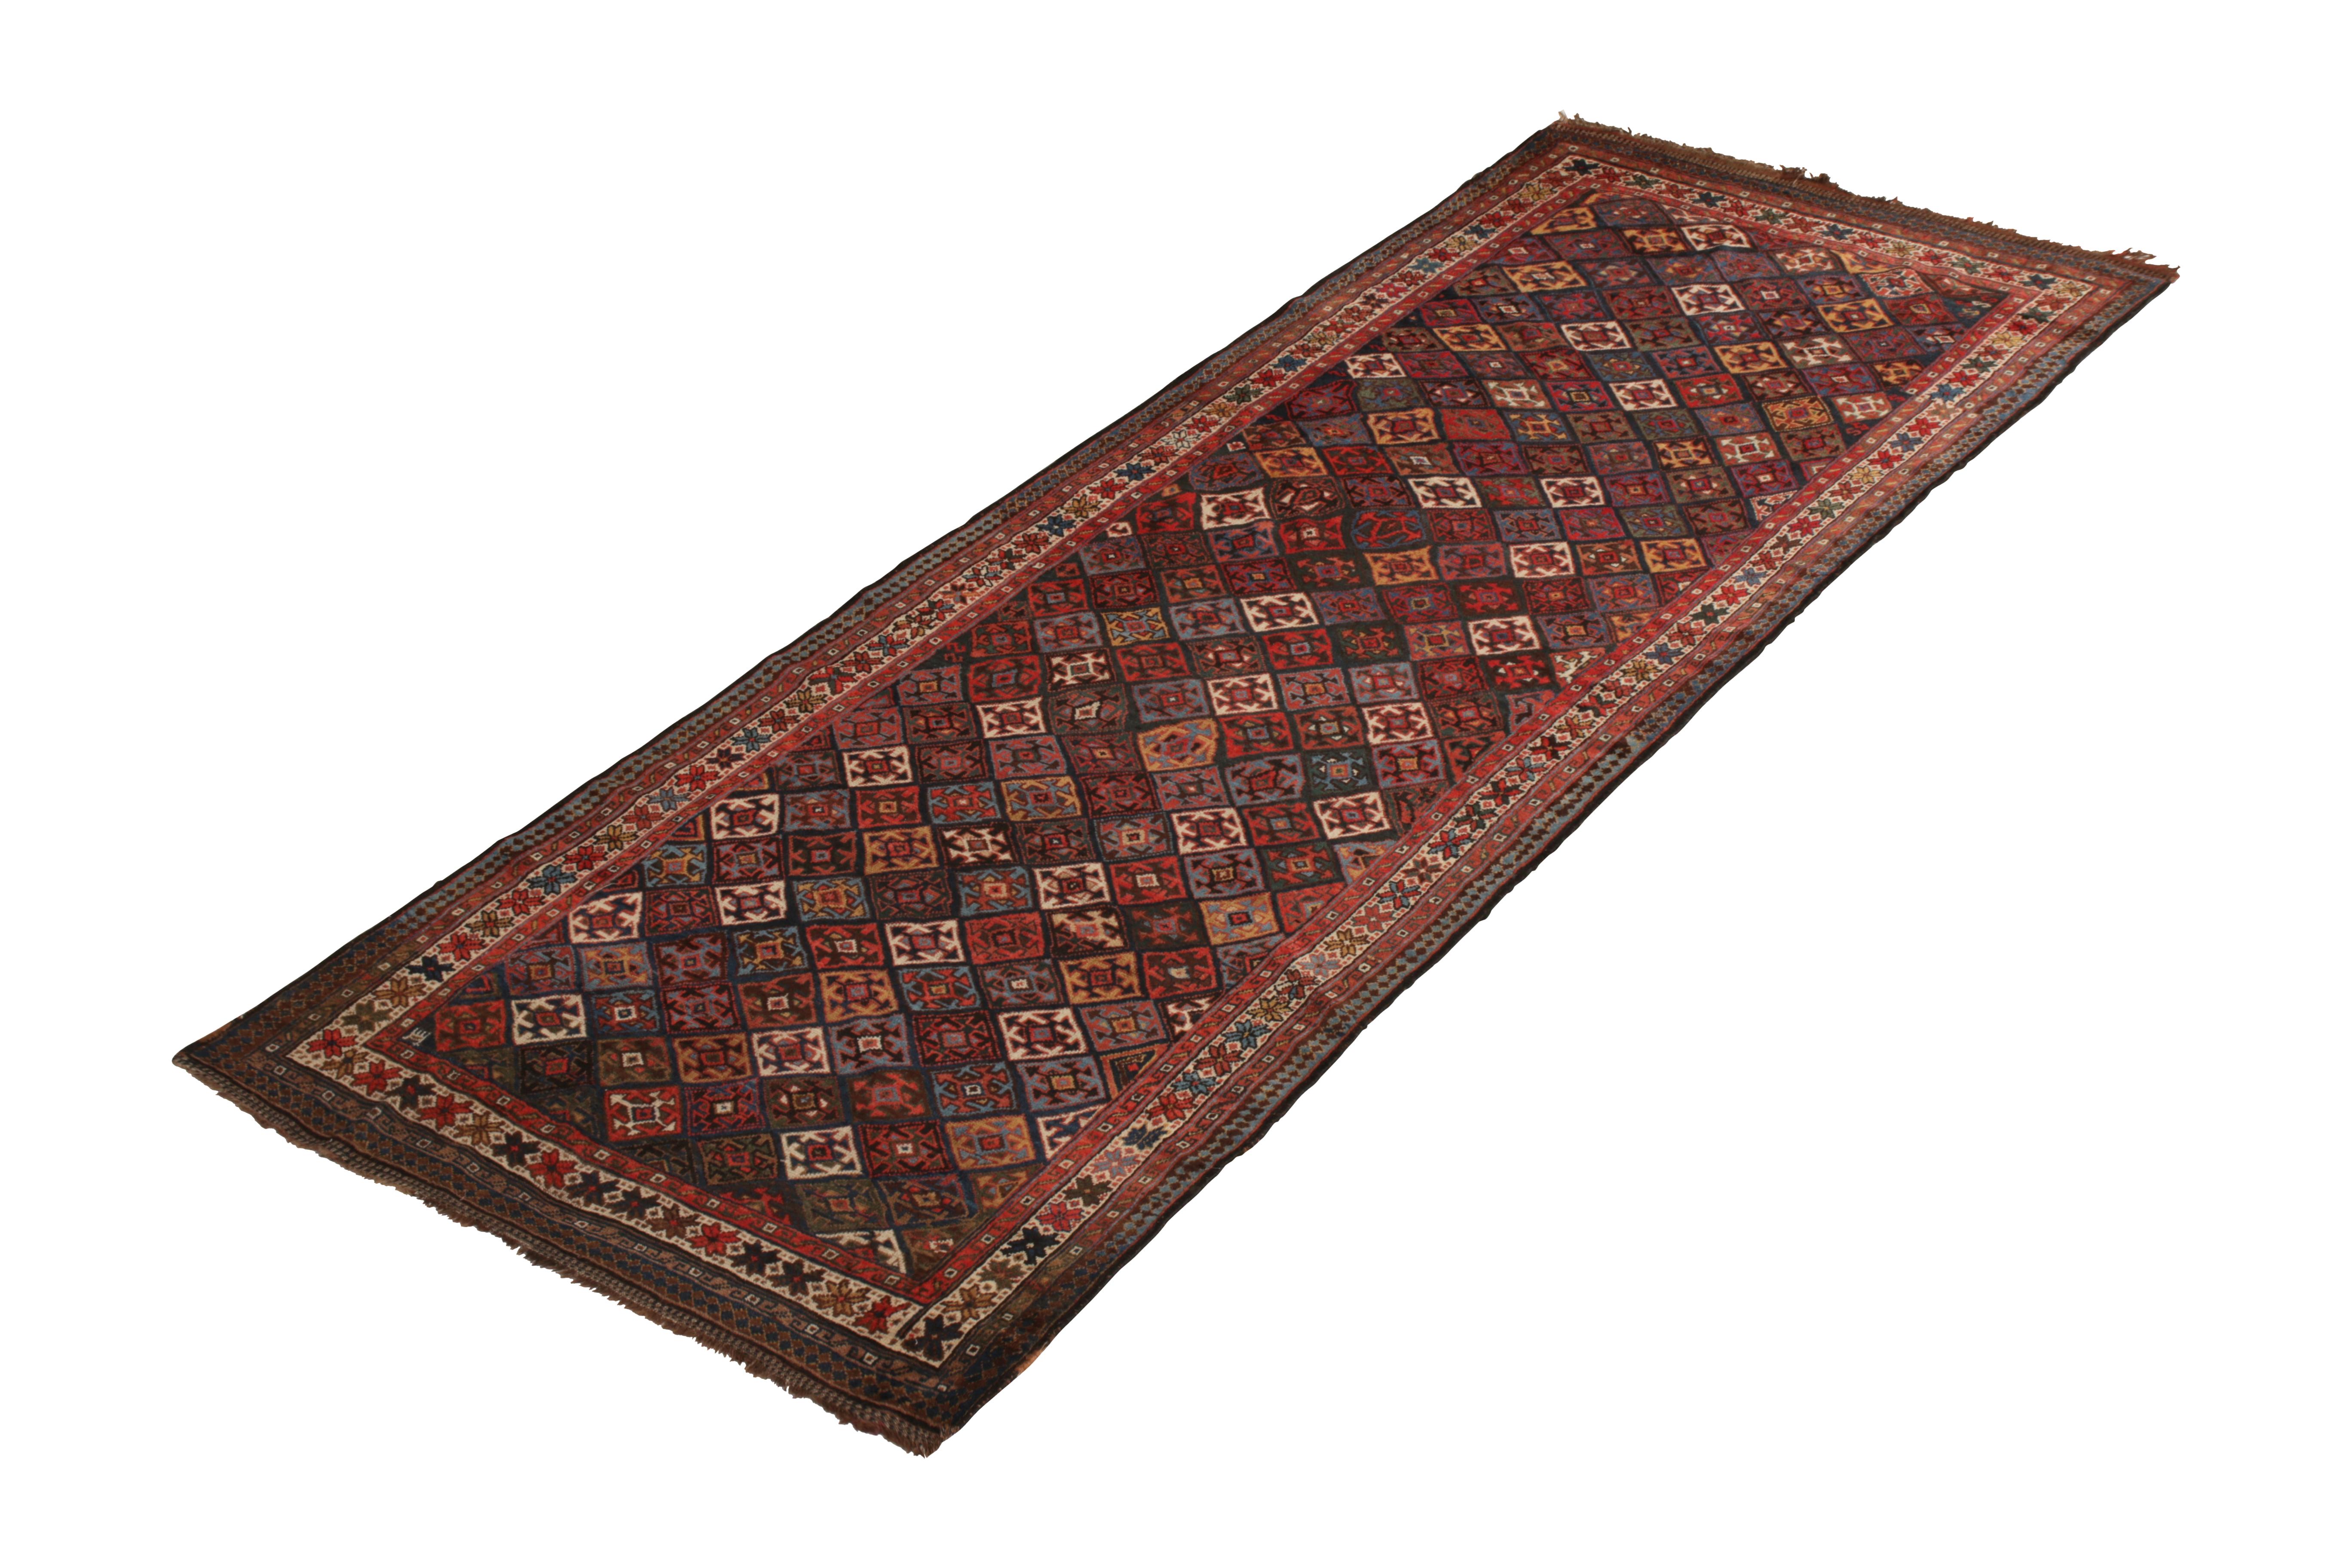 Hand knotted in wool originating from Persia circa 1890-1900, this antique rug enjoys the subtle distinction of the Kudish rug design, remarked in no small part in this approach to multicolor accents against the prevailing crimson red and